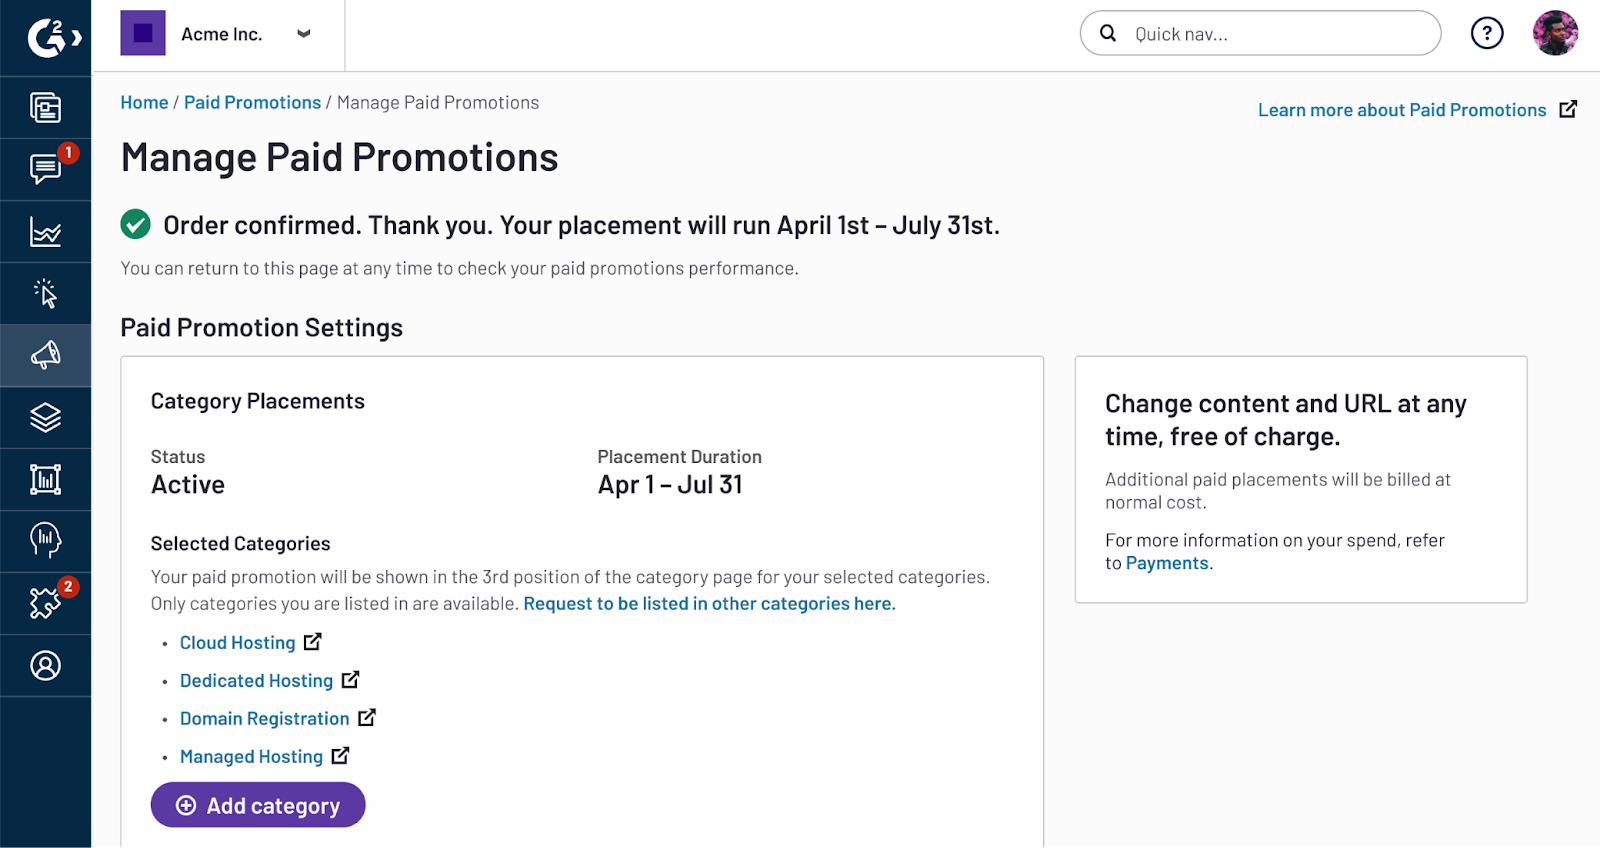 Managing paid promotions